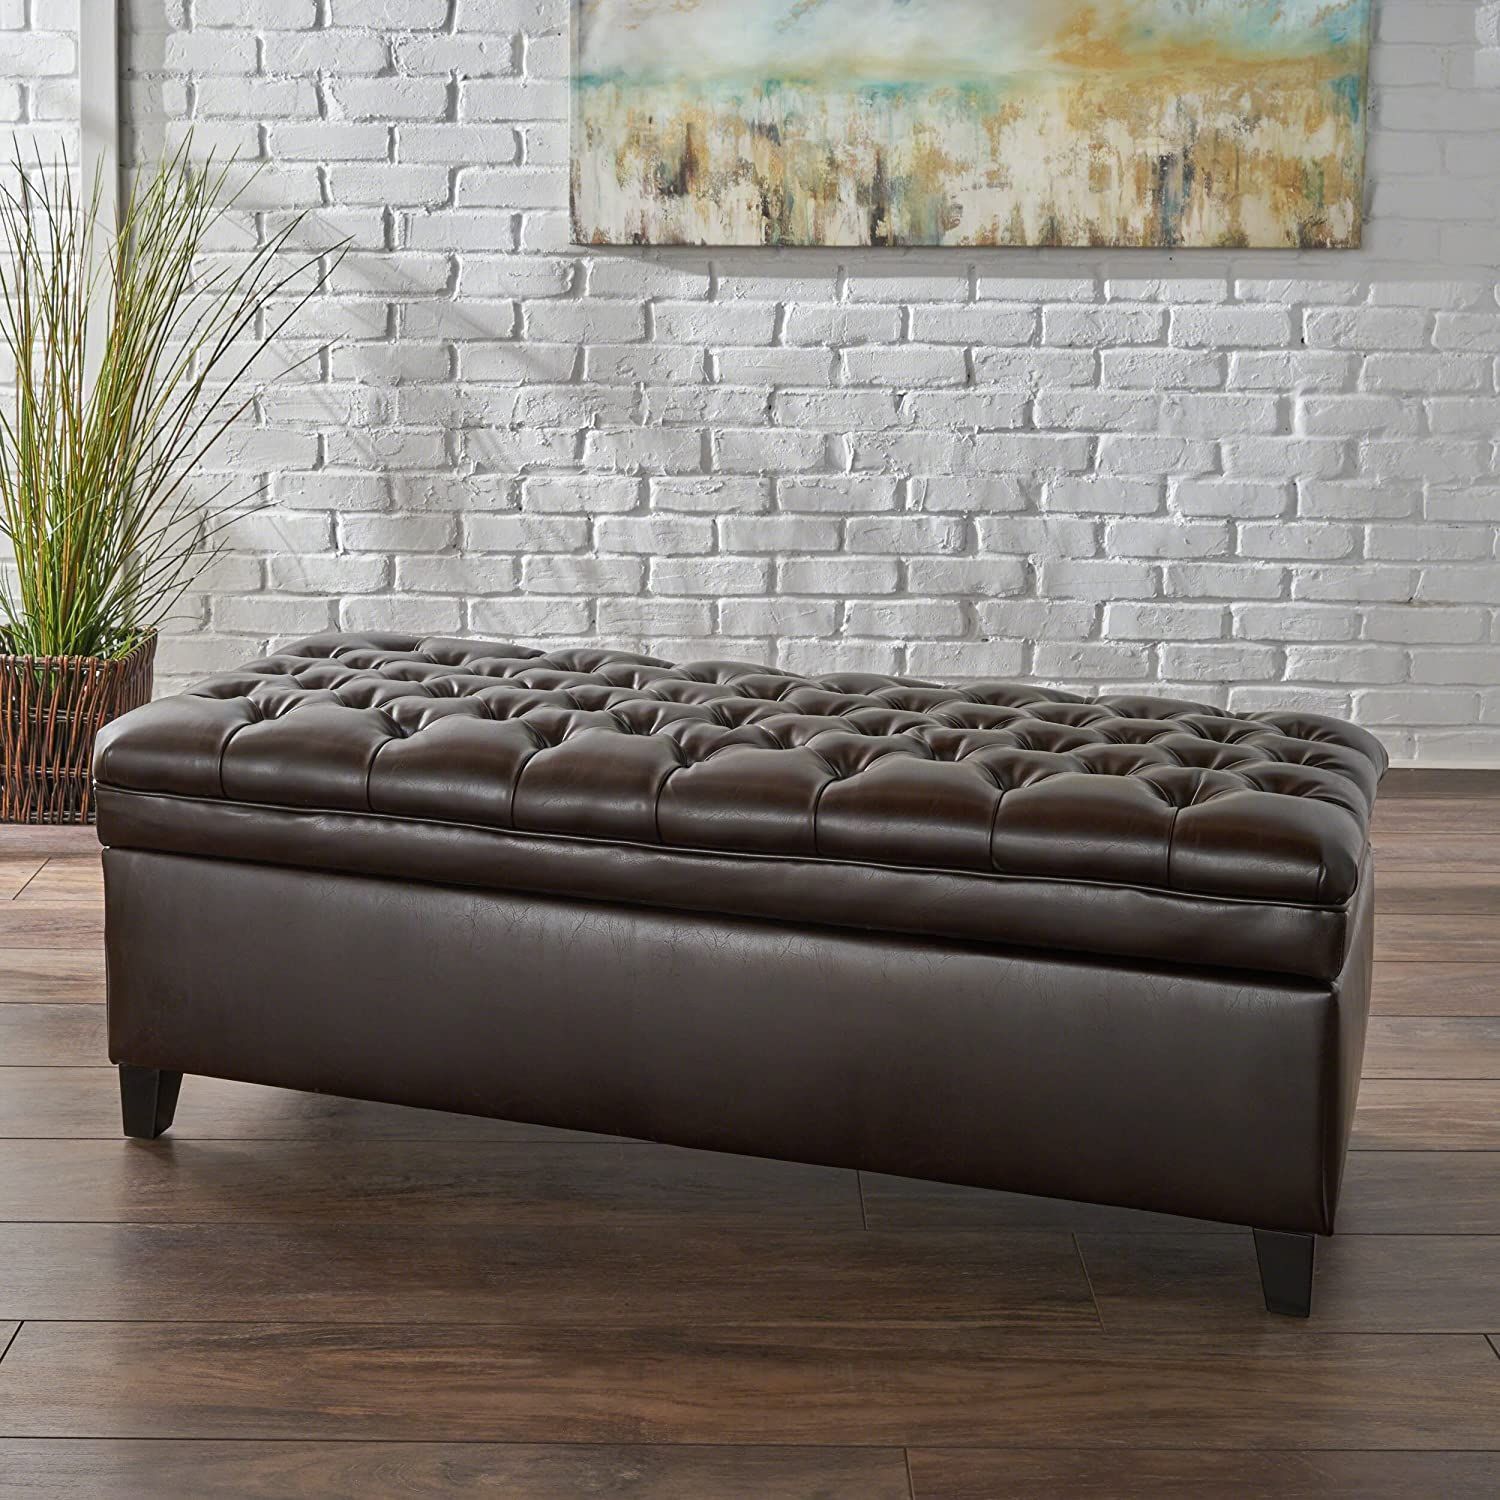 Christopher Knight Home 296865 Sheffield Pu Brown Tufted Storage Throughout Brown Fabric Tufted Surfboard Ottomans (View 16 of 20)